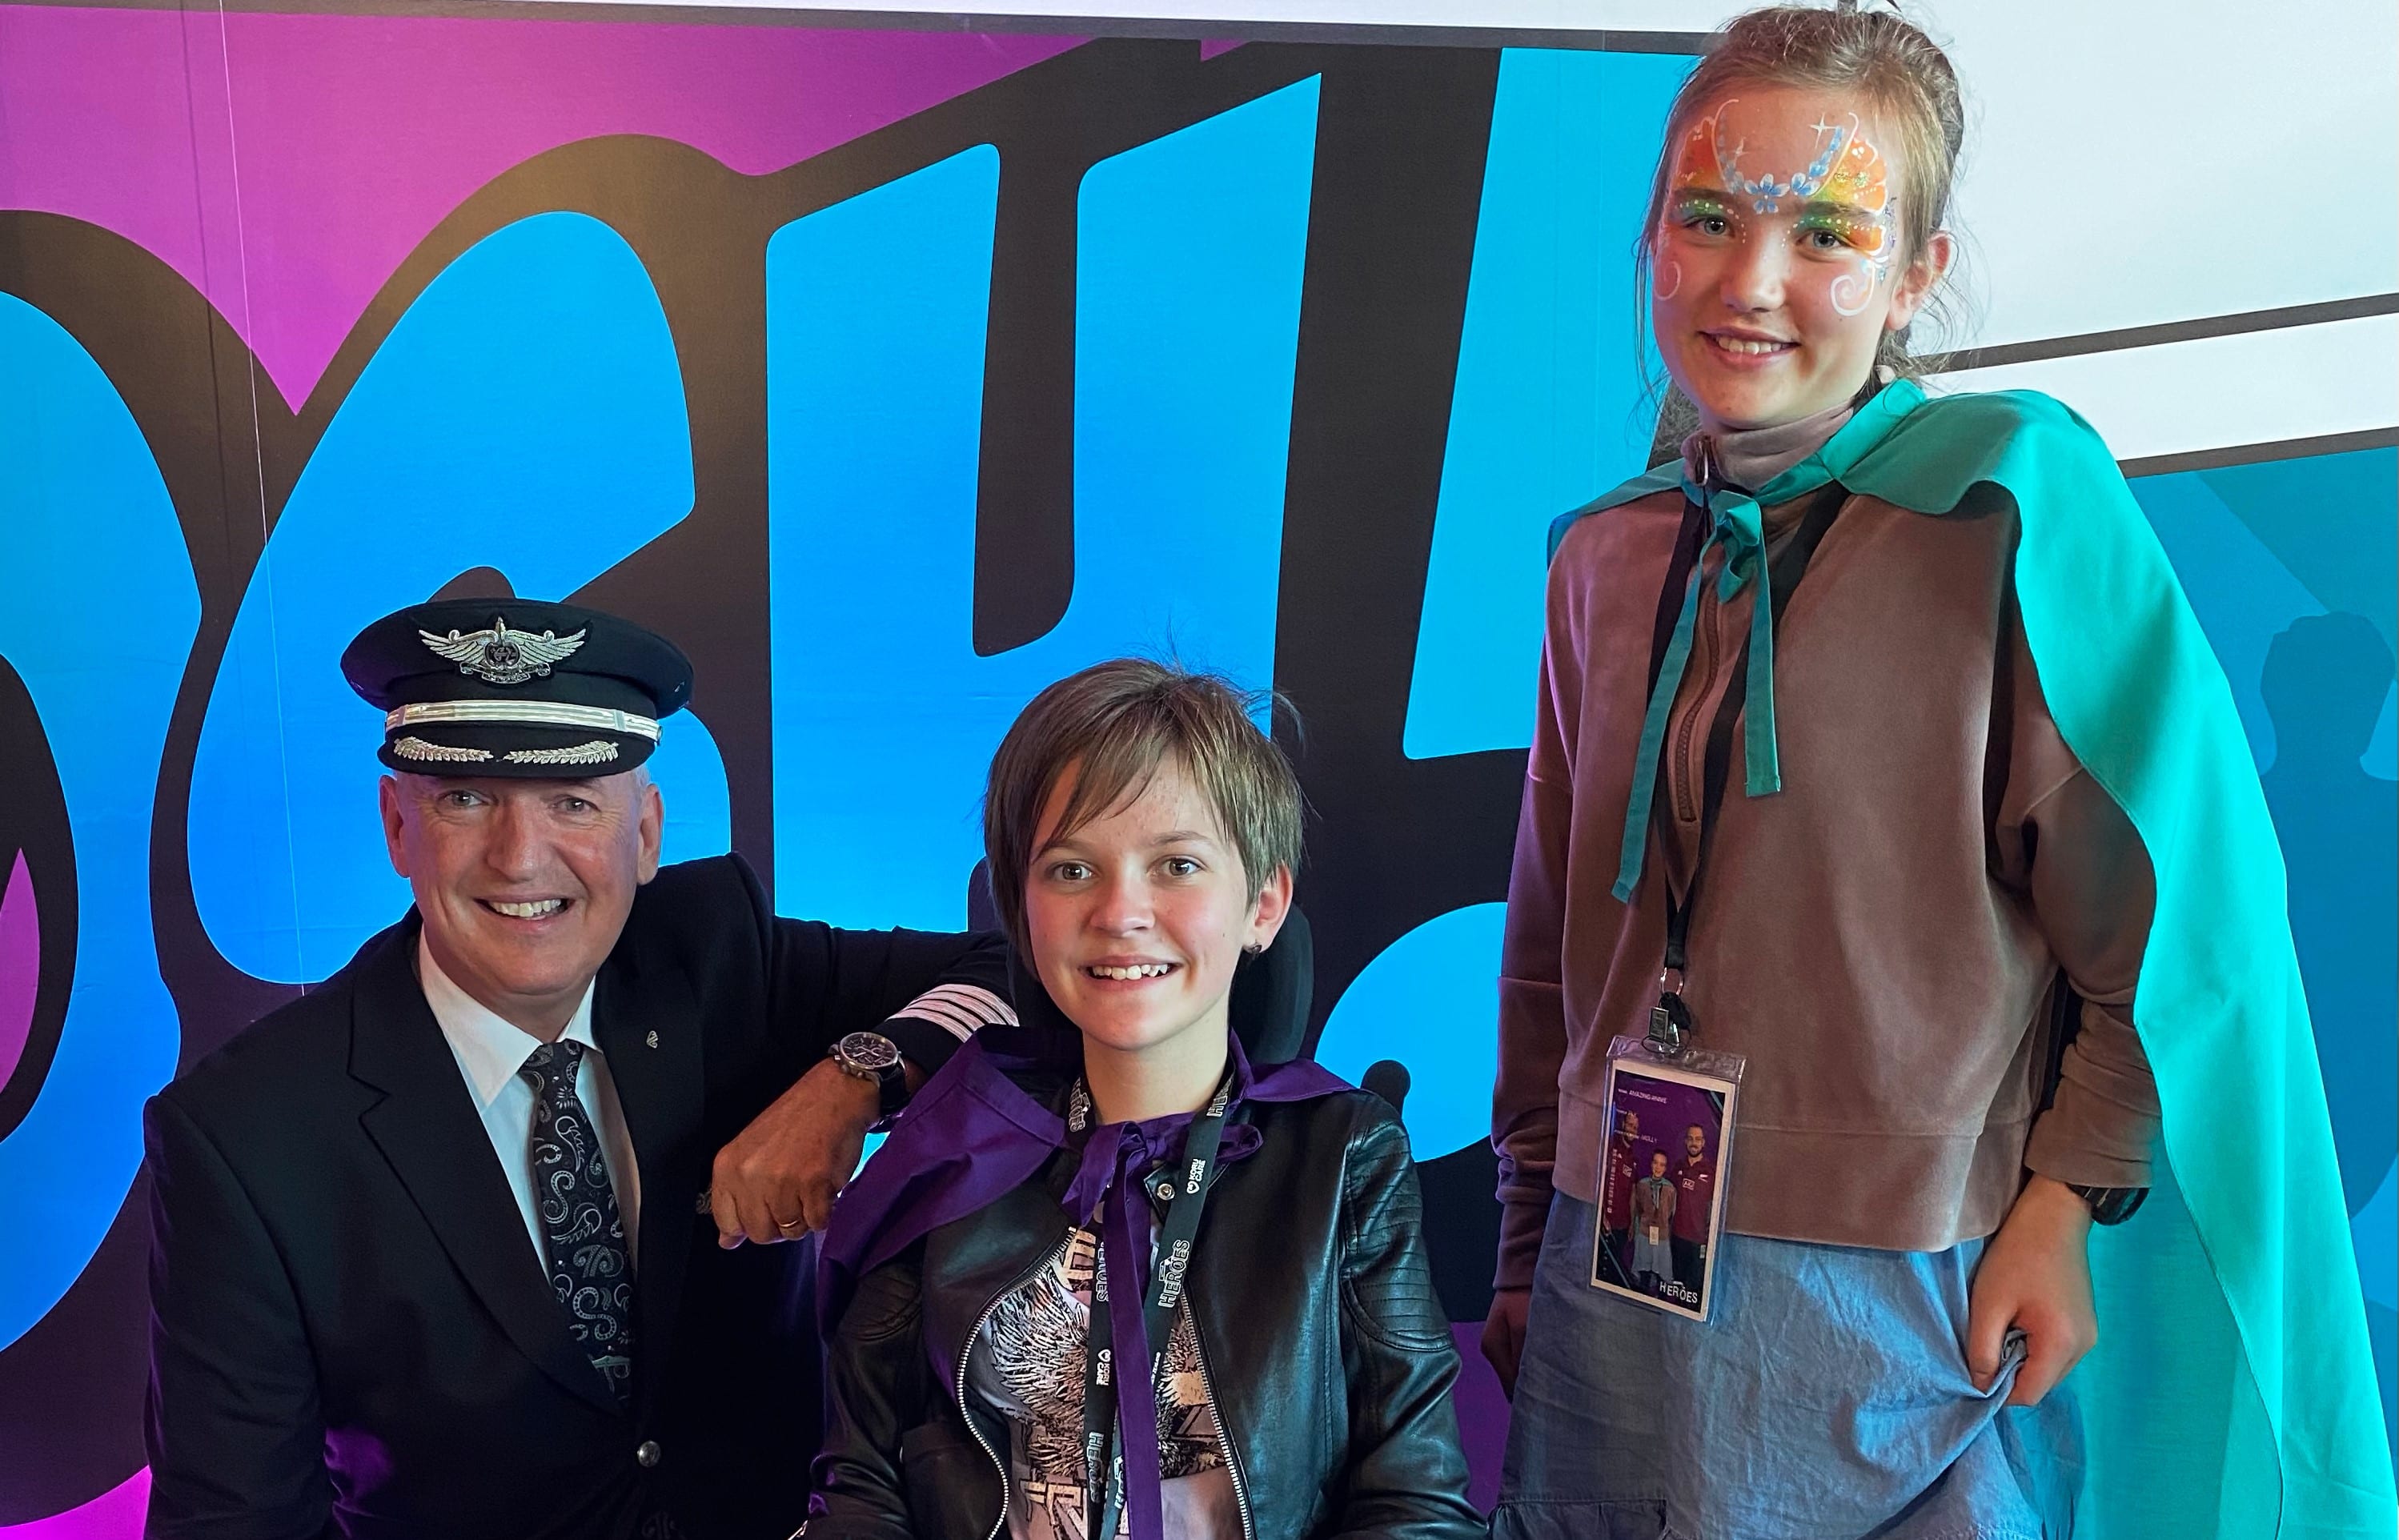 Air NZ chief pilot Captain David Morgan with Lilly, 12, and Annie, 11, before the flight in Christchurch.